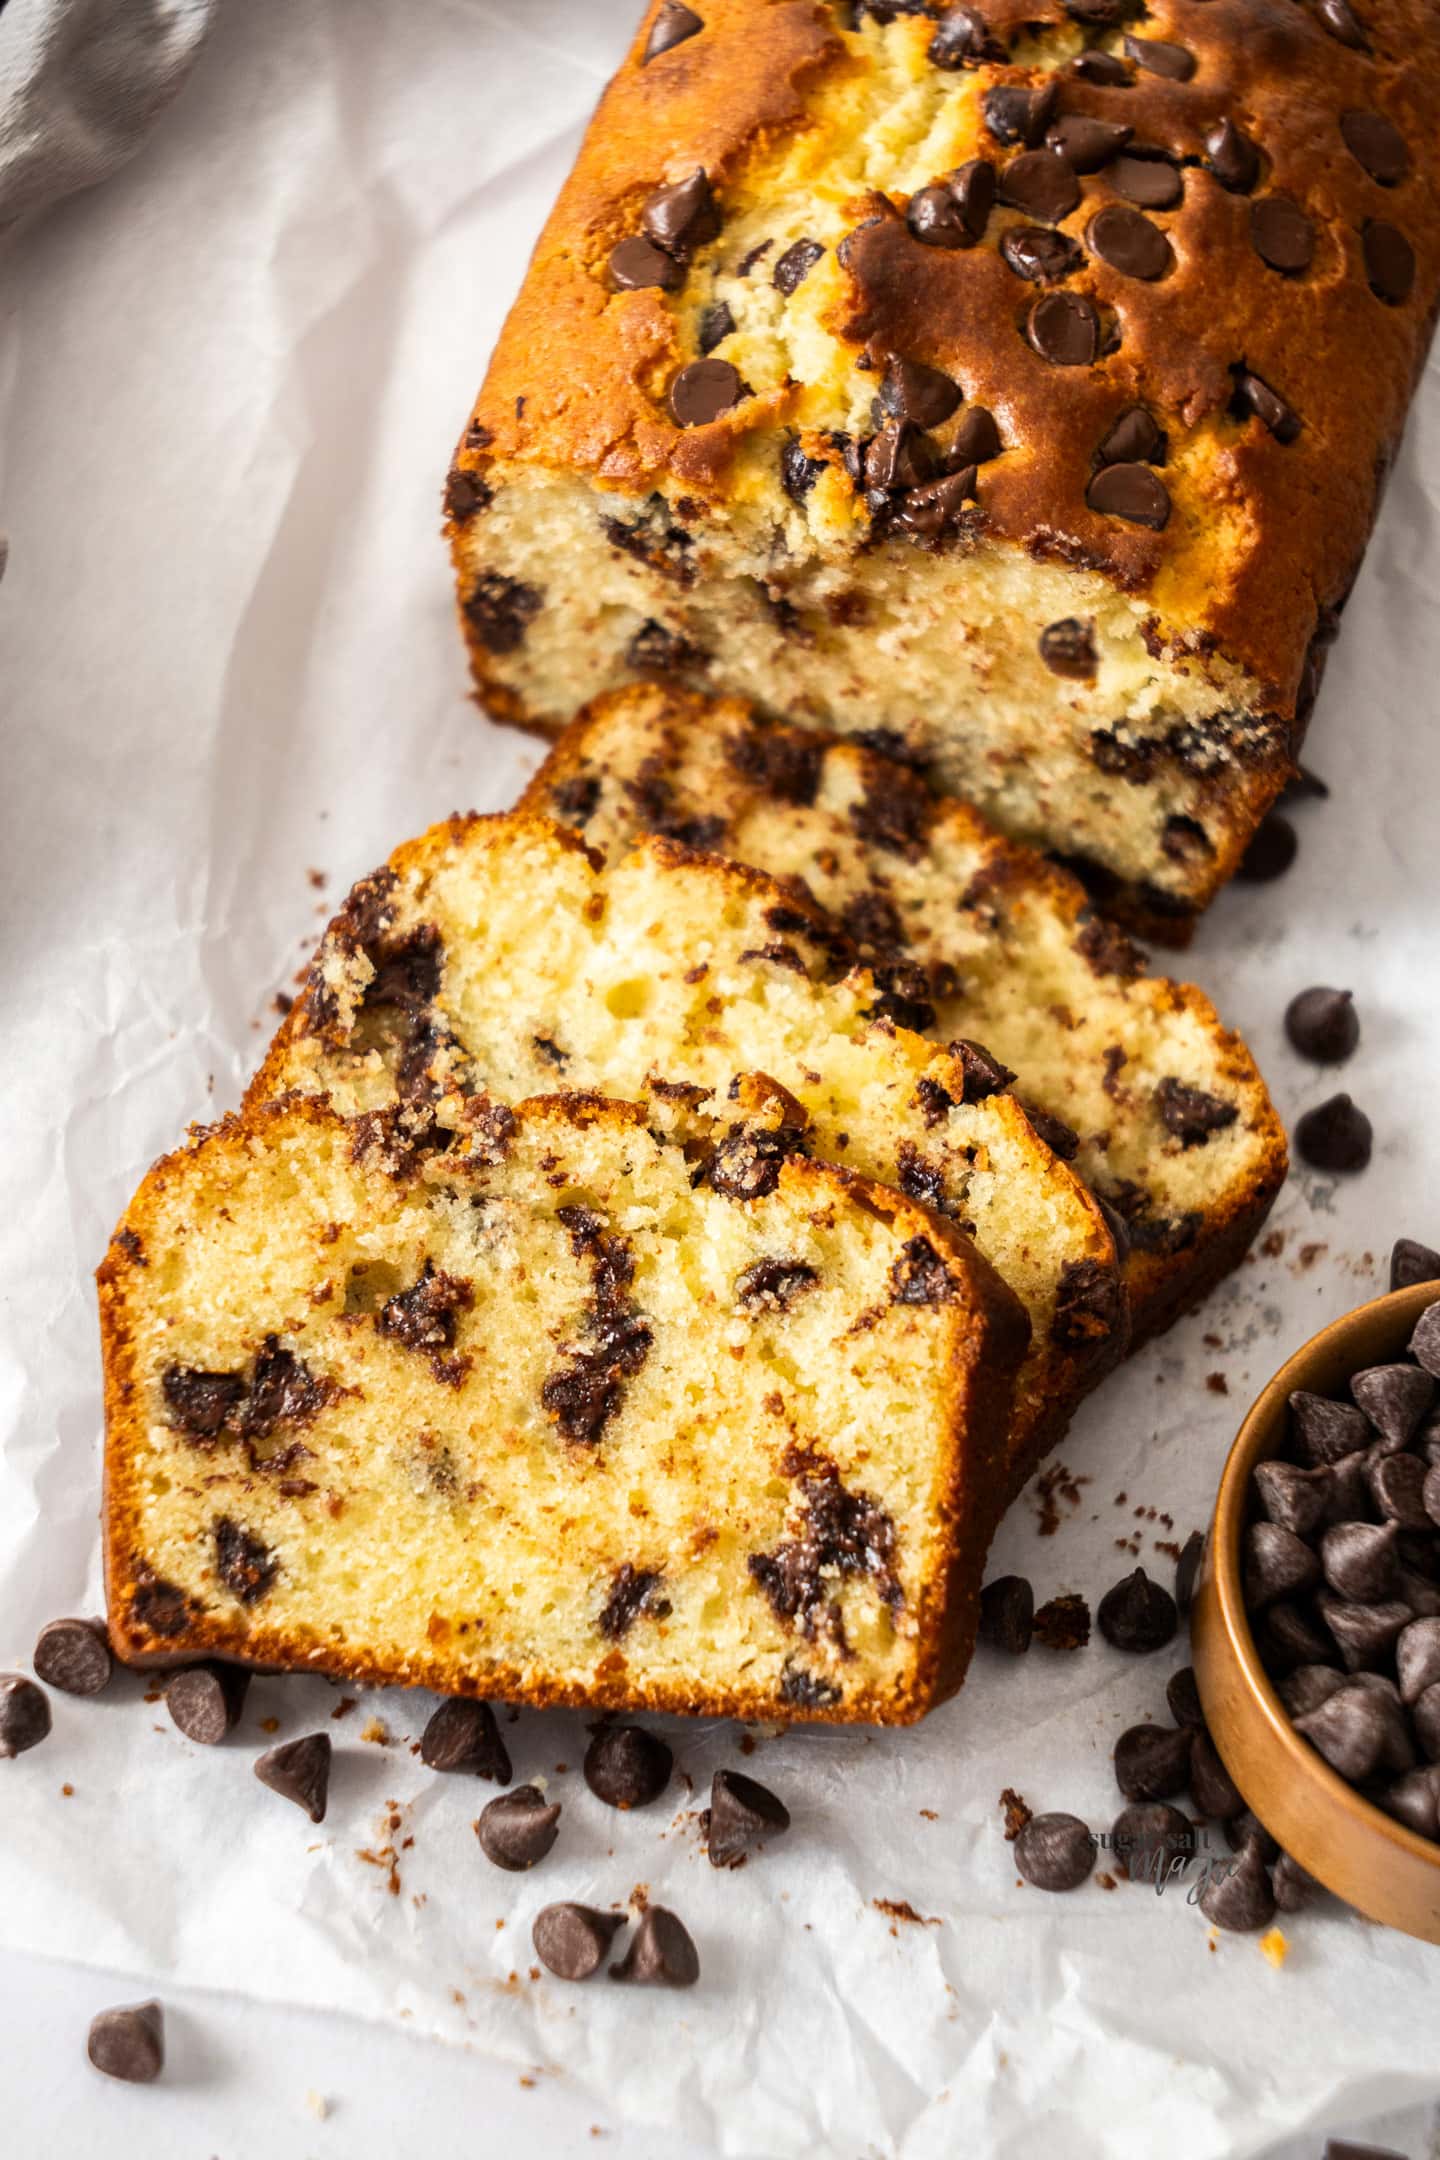 Closeup of slices of chocolate chip loaf cake.